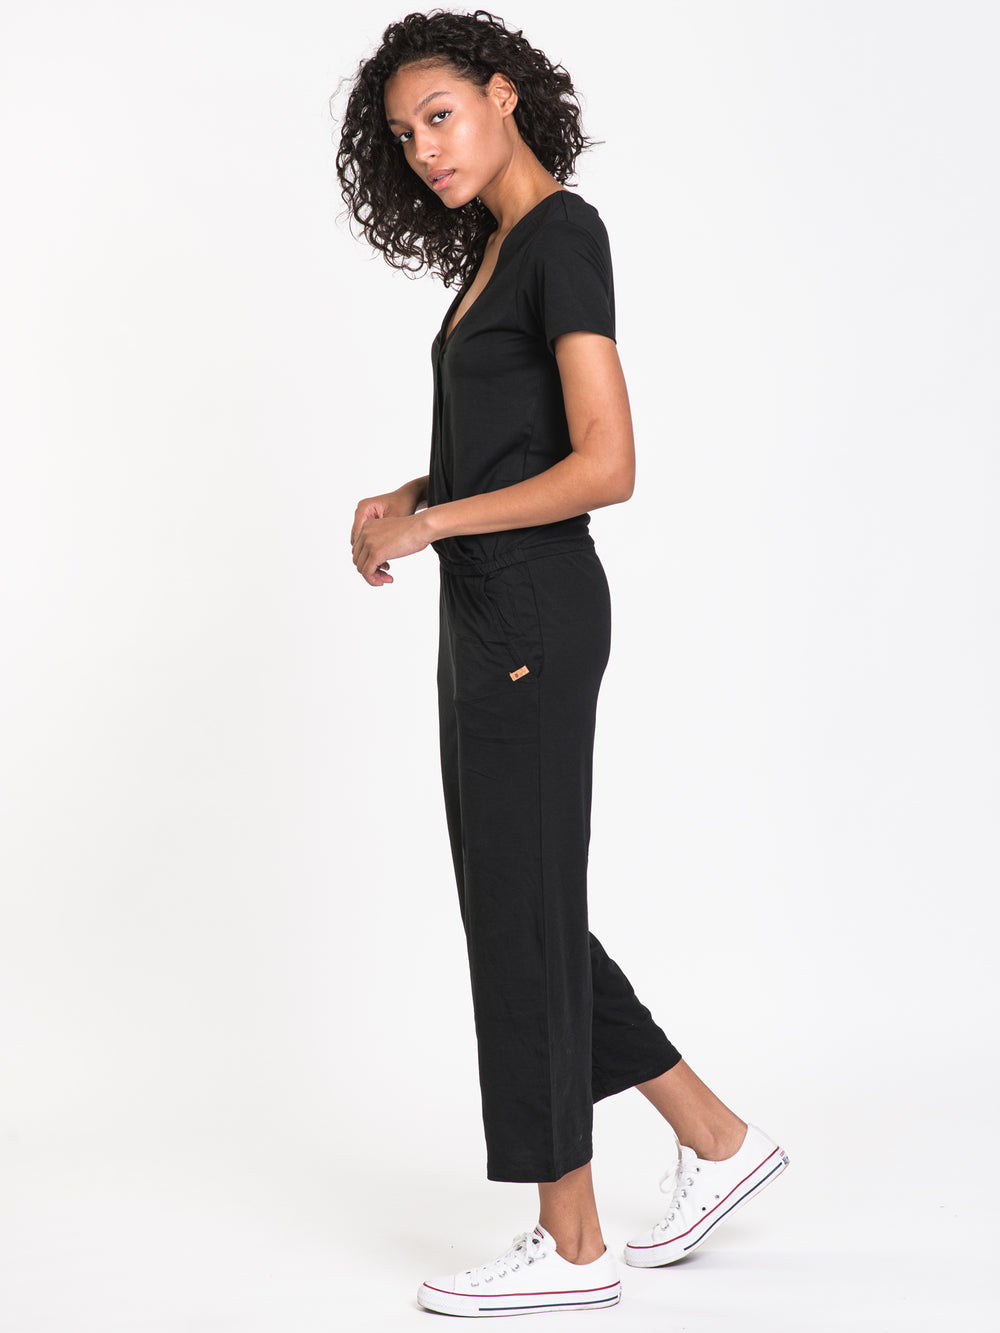 TENTREE BLAKELY SHORT SLEEVE JUMPSUIT  - CLEARANCE